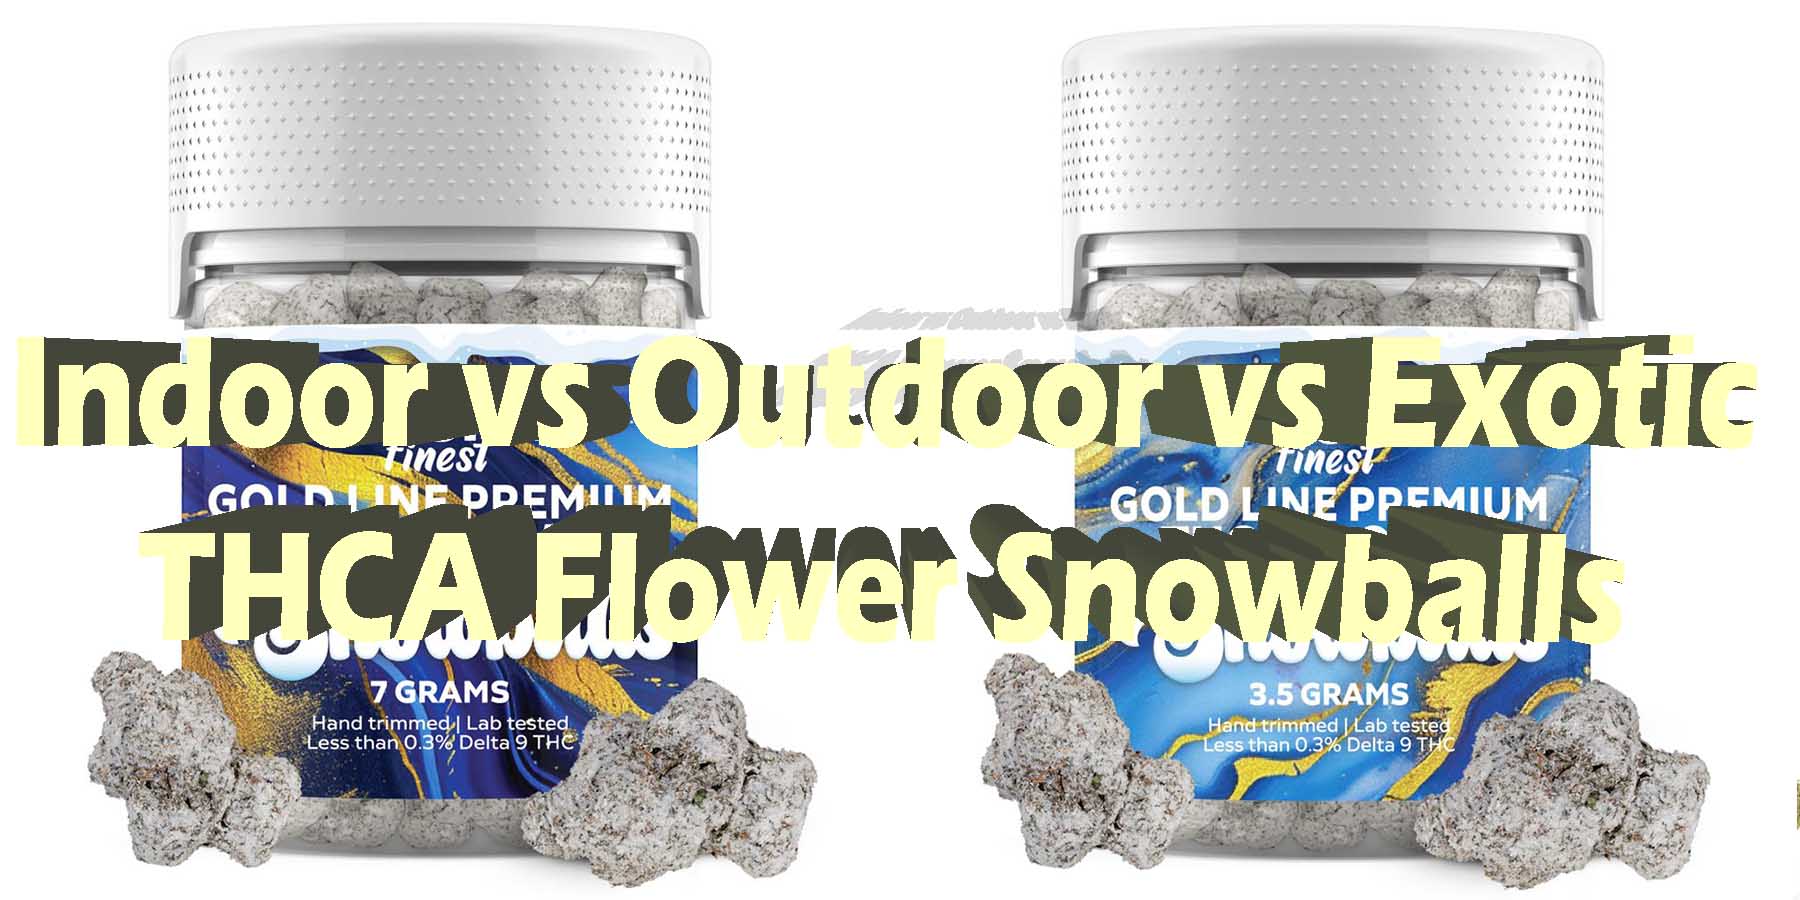 Indoor vs Outdoor vs Exotic LowestPrice Coupon Discount For Smoking Best High Smoke Shop Online Where To Buy How To Buy Online Smoke Shop THC THCA Near Me Legal Bloomz.